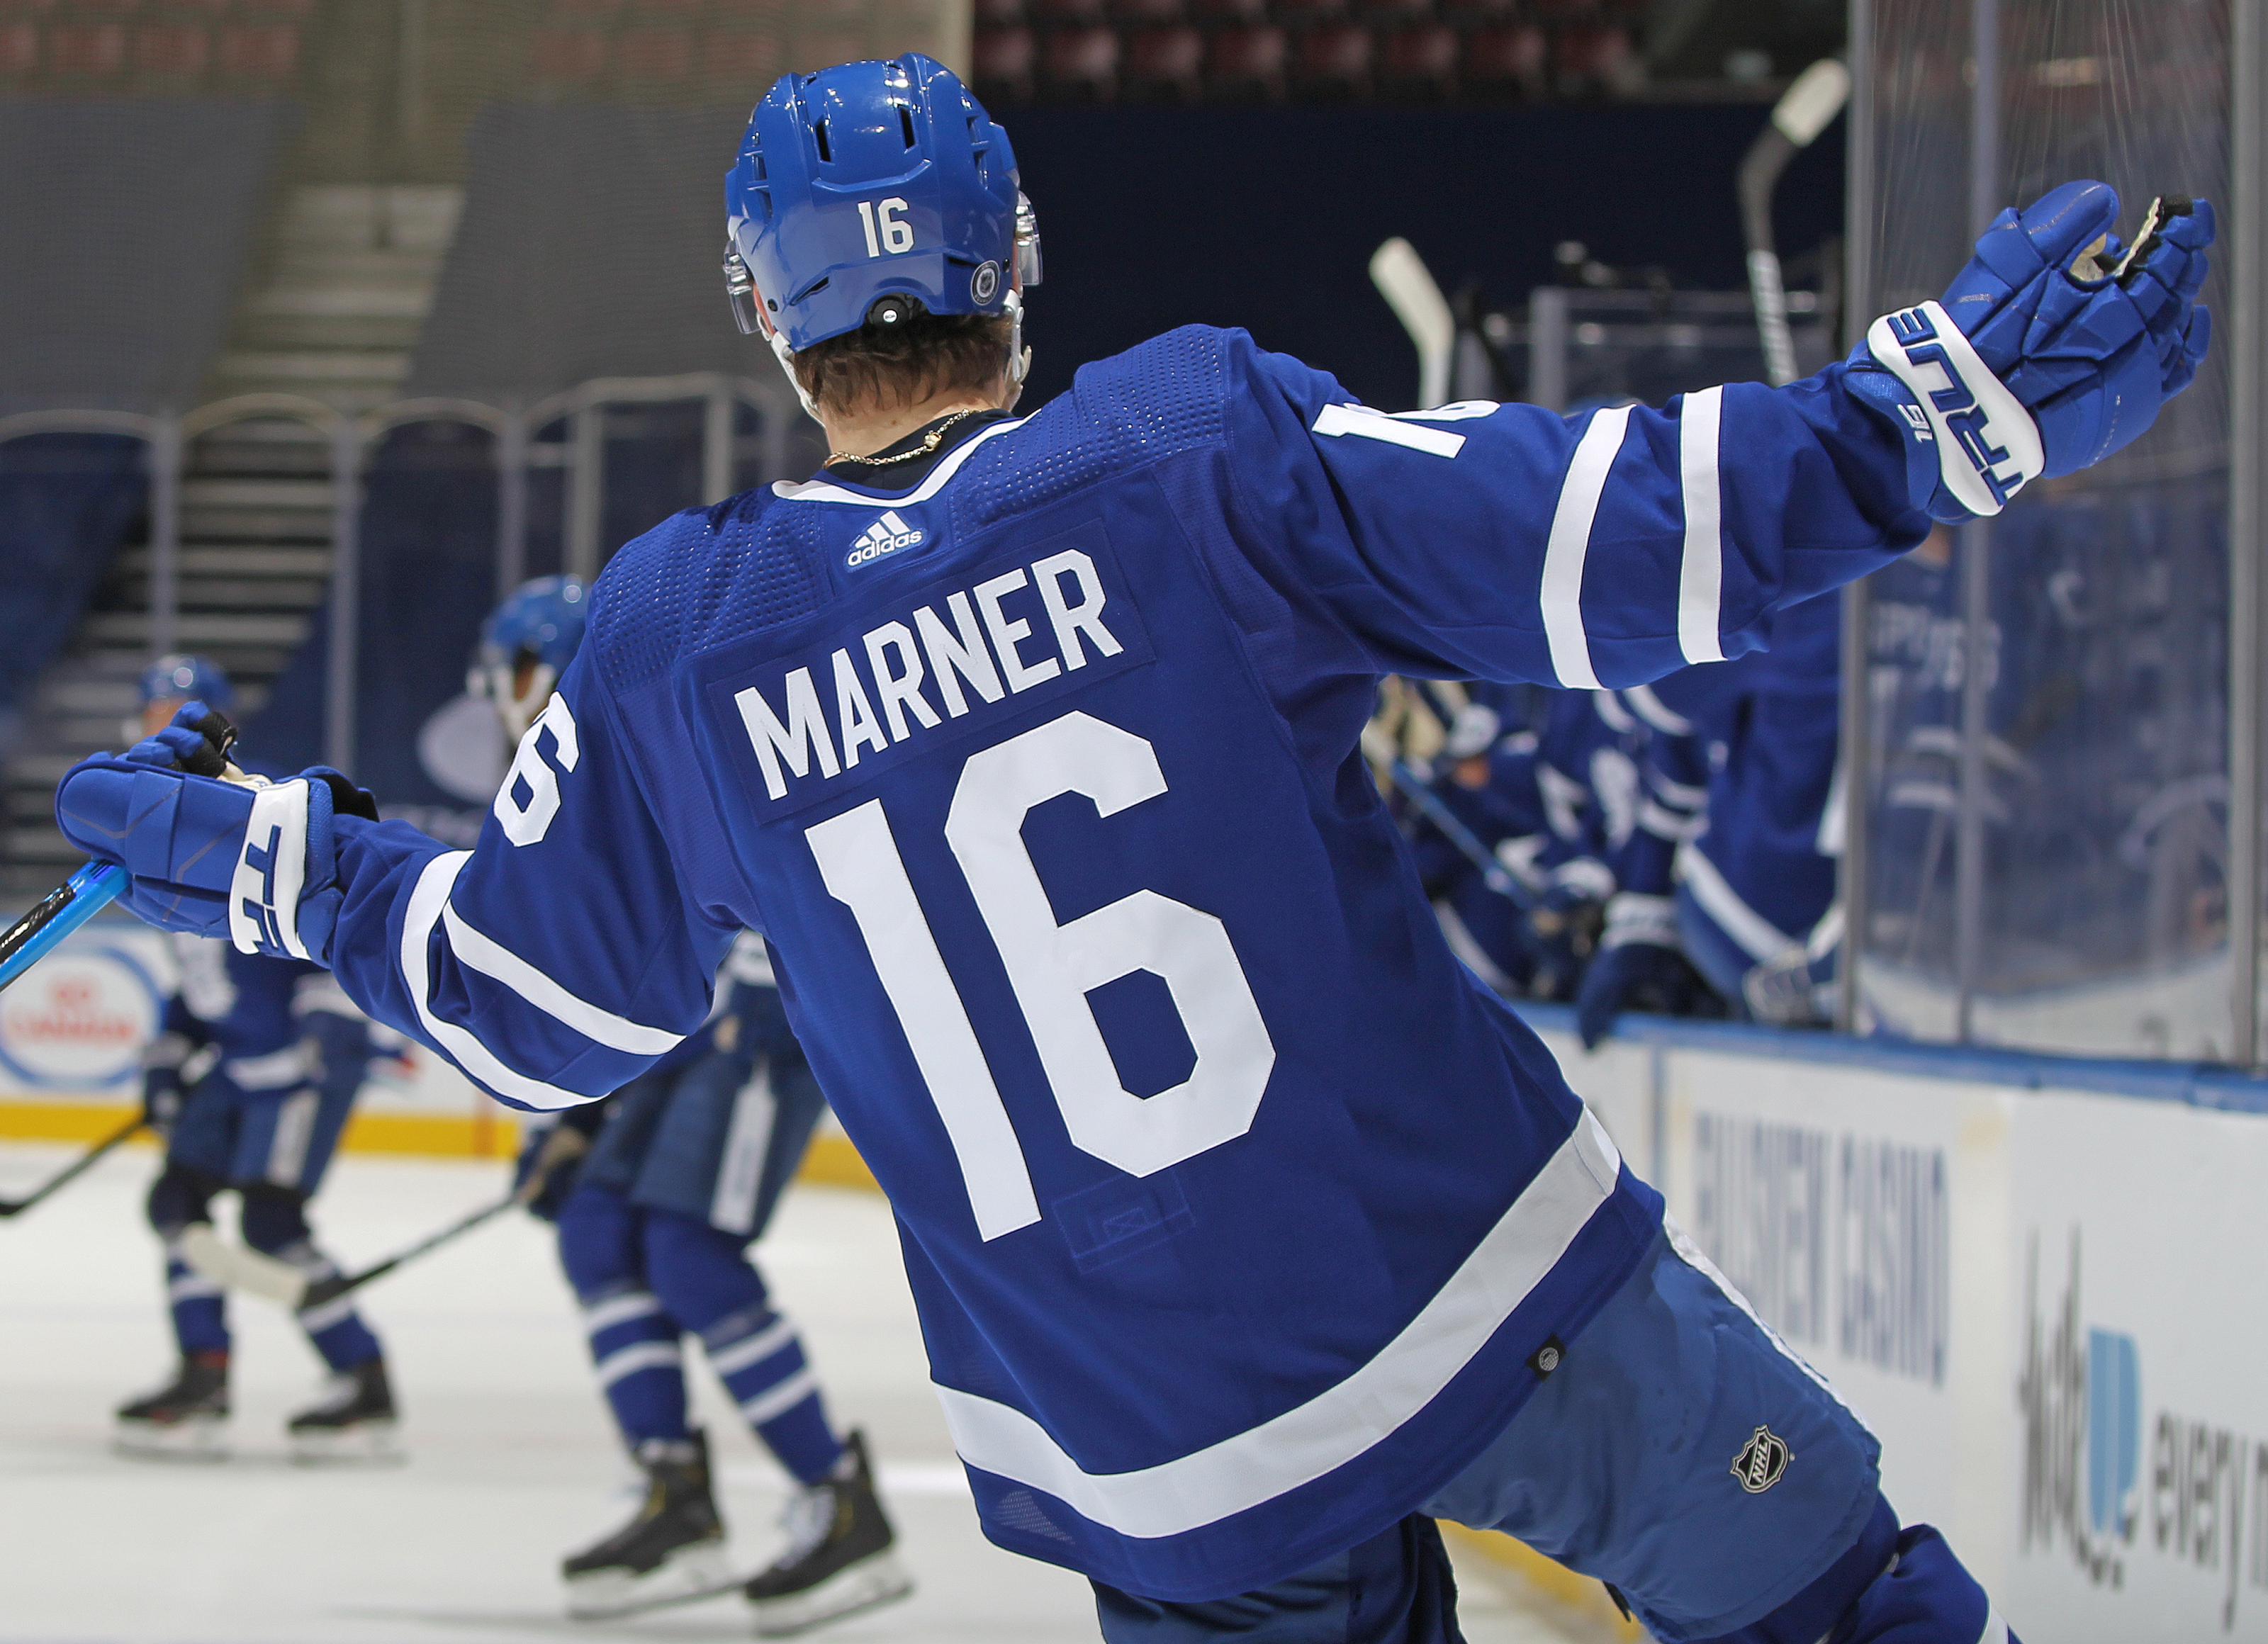 NHL All-Star Game: Maple Leafs' Mitch Marner has made it. Now